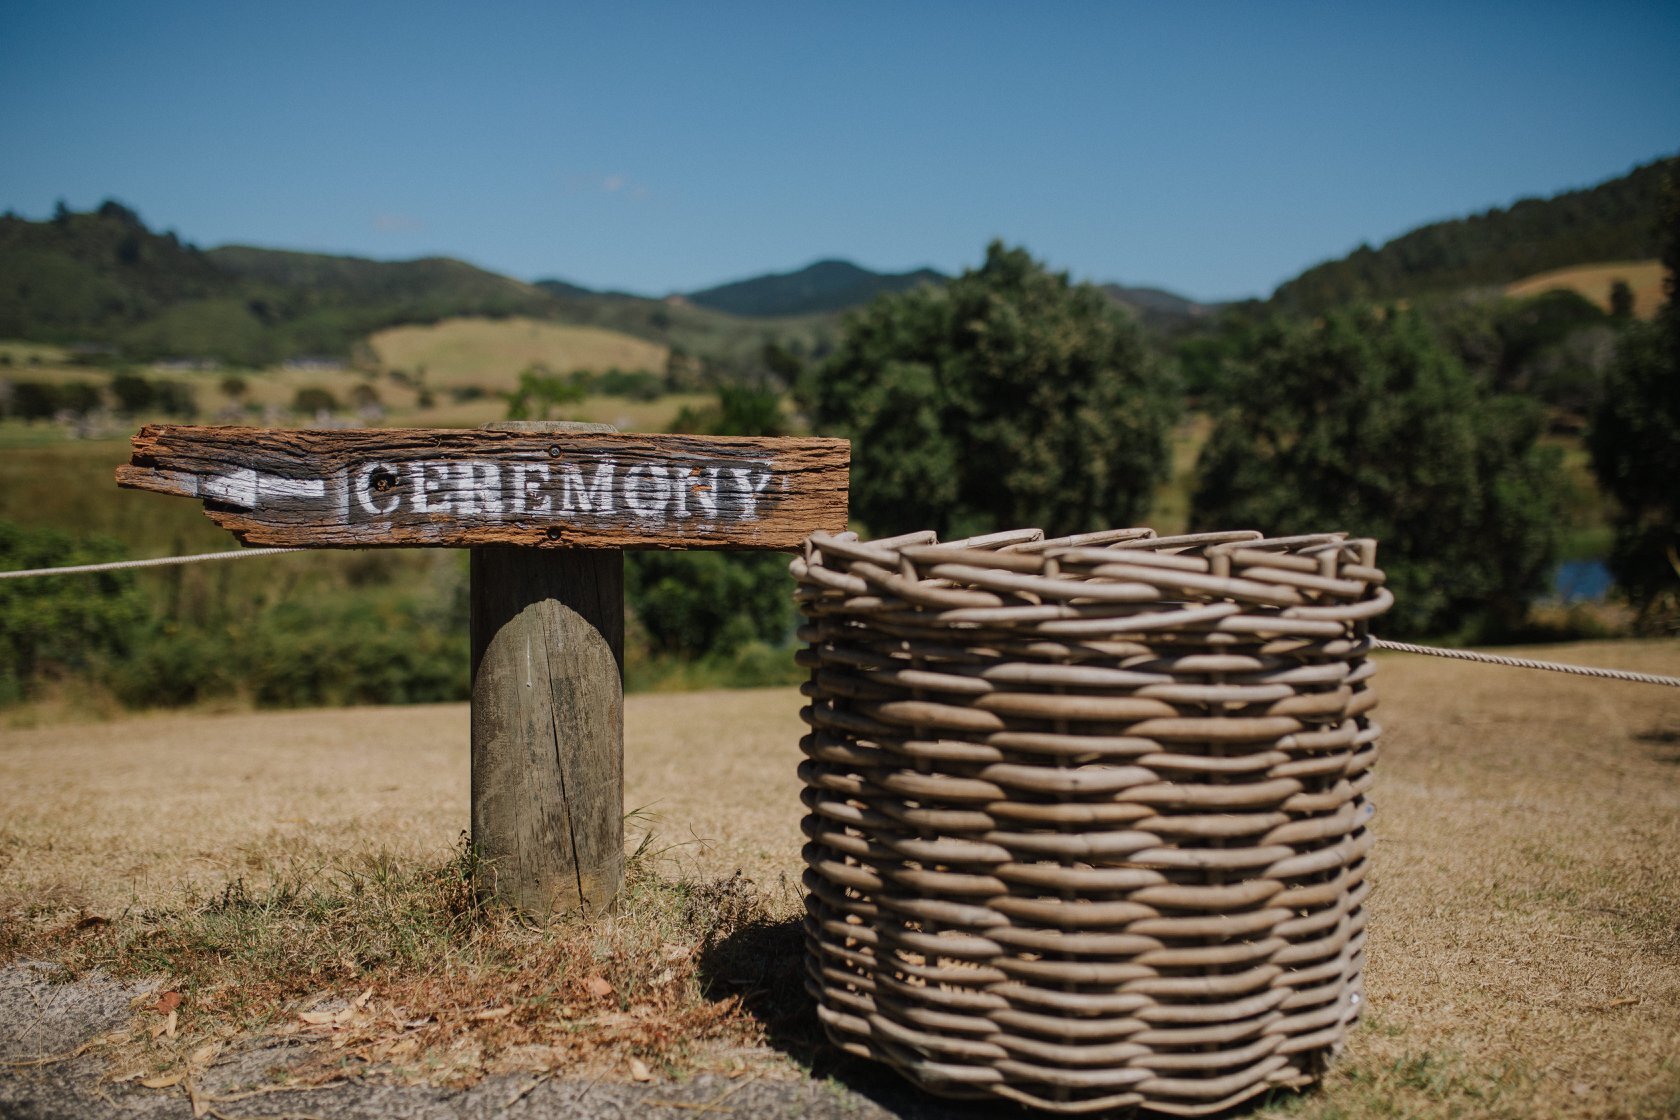 Rustic ceremony signage with woven wooden basket